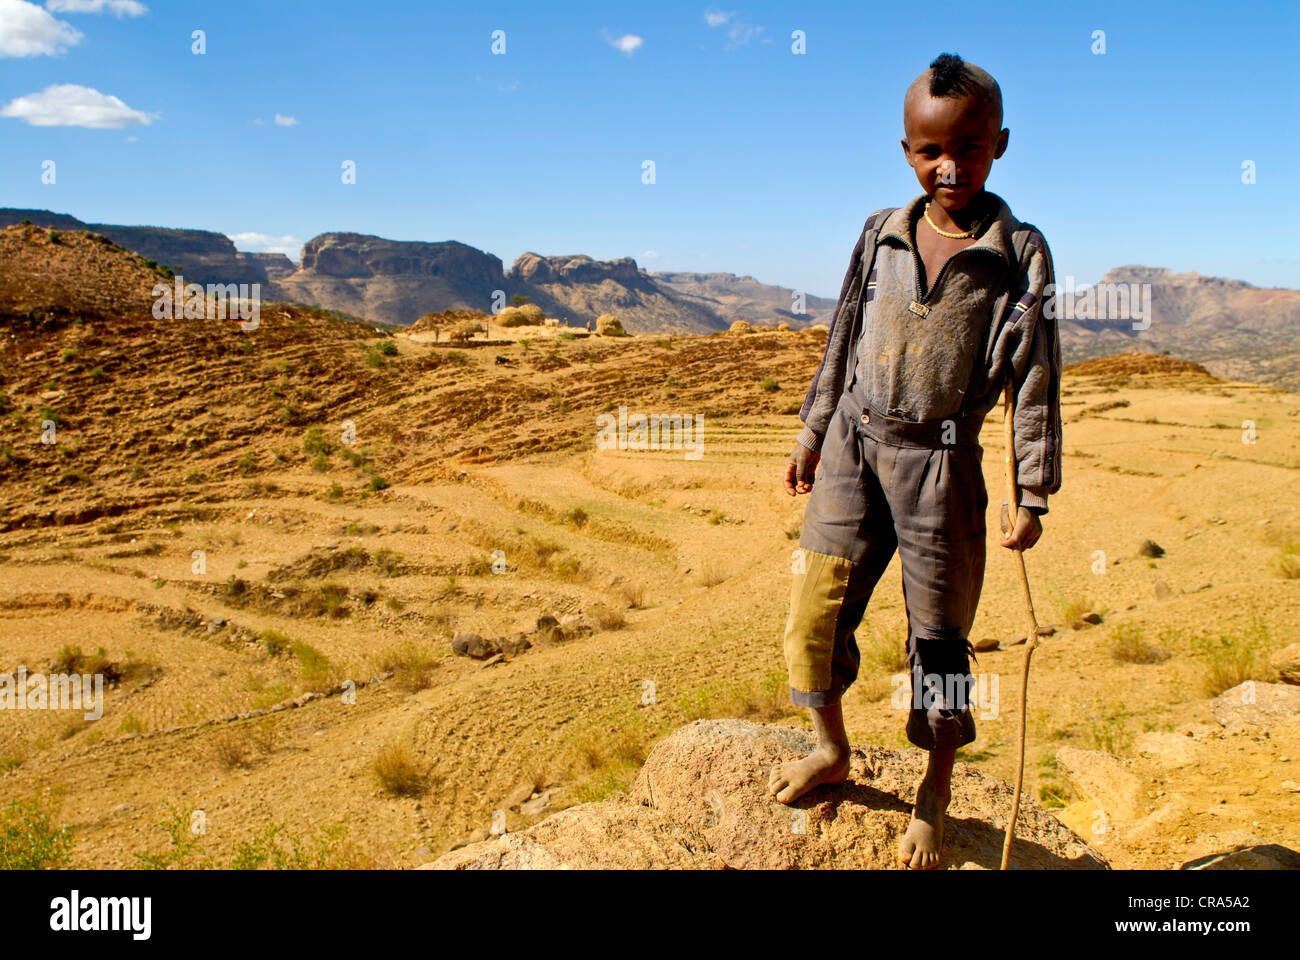 Black boy with a mohawk hairdo standing in front of the barren landscape of northern Ethiopia, Ethiopia, Africa Stock Photo